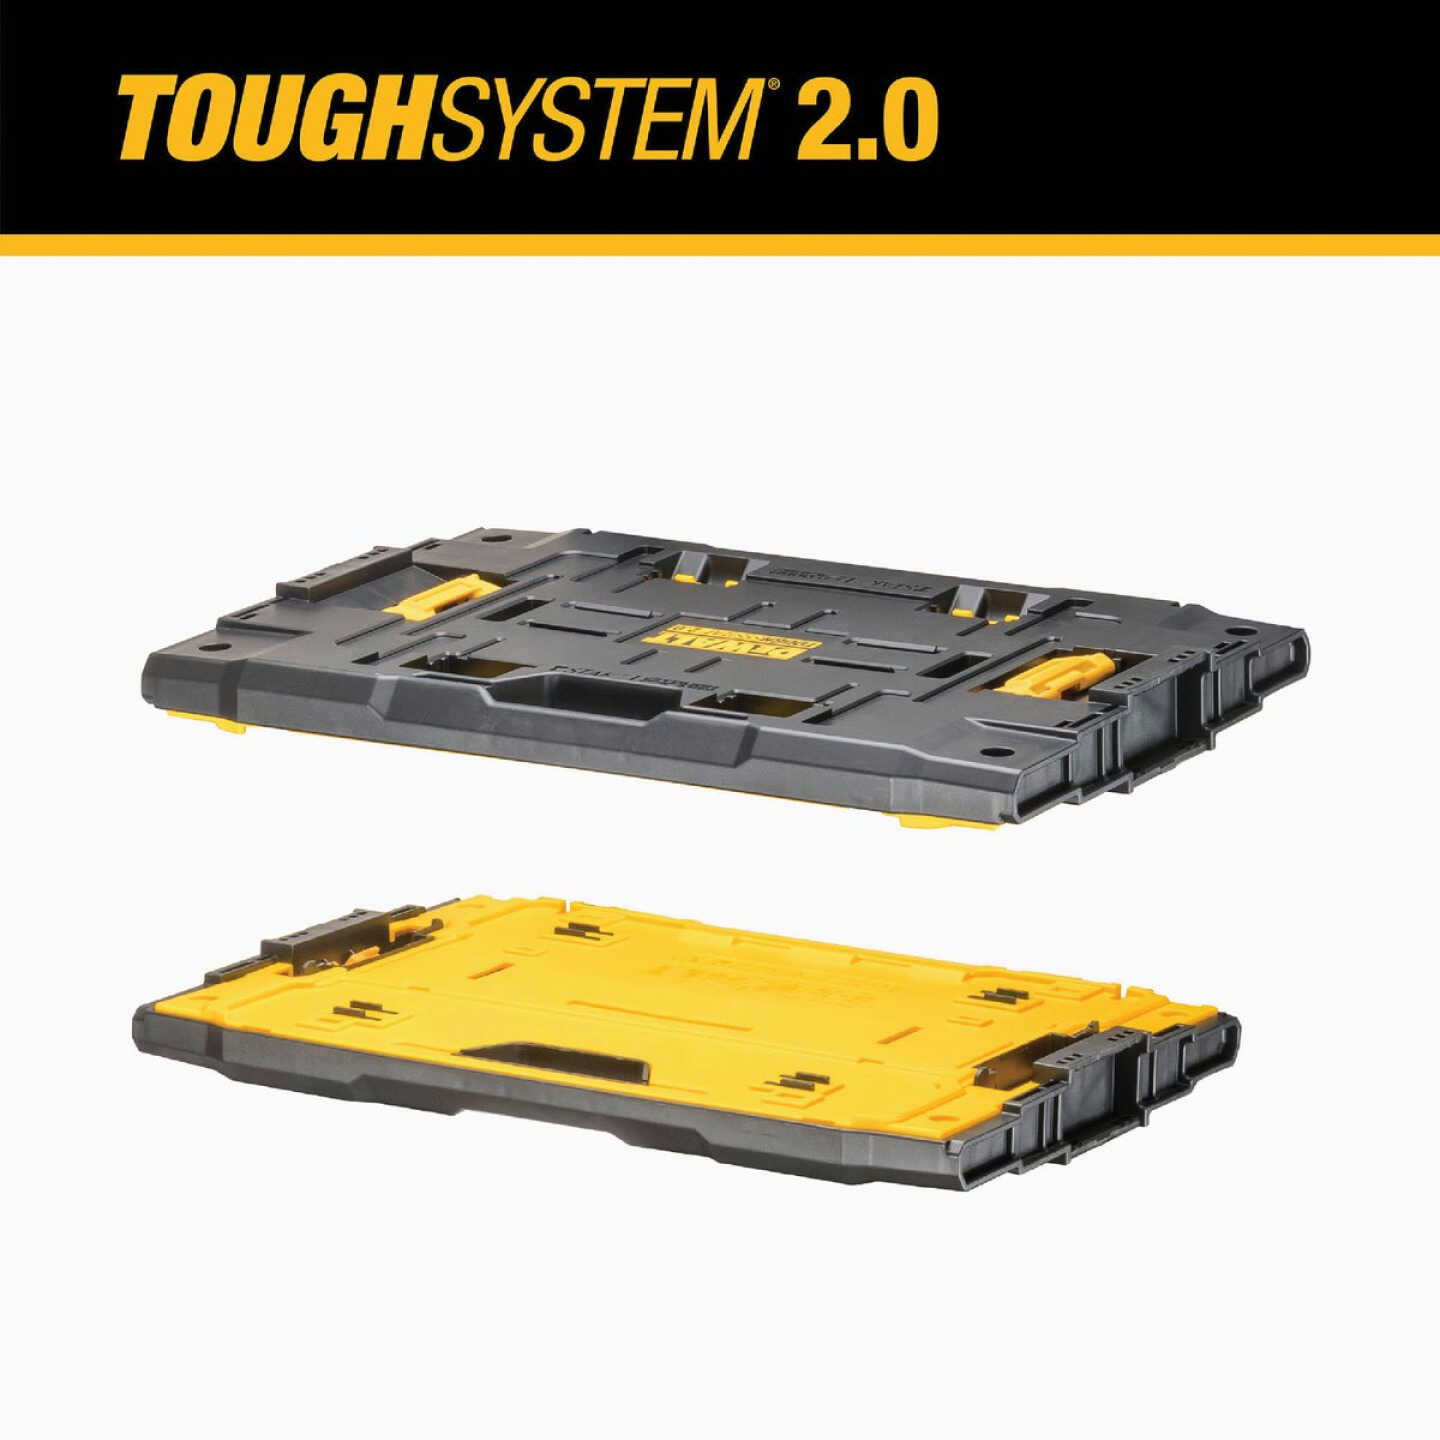 I spotted this on the tool launch page for the DWST08017